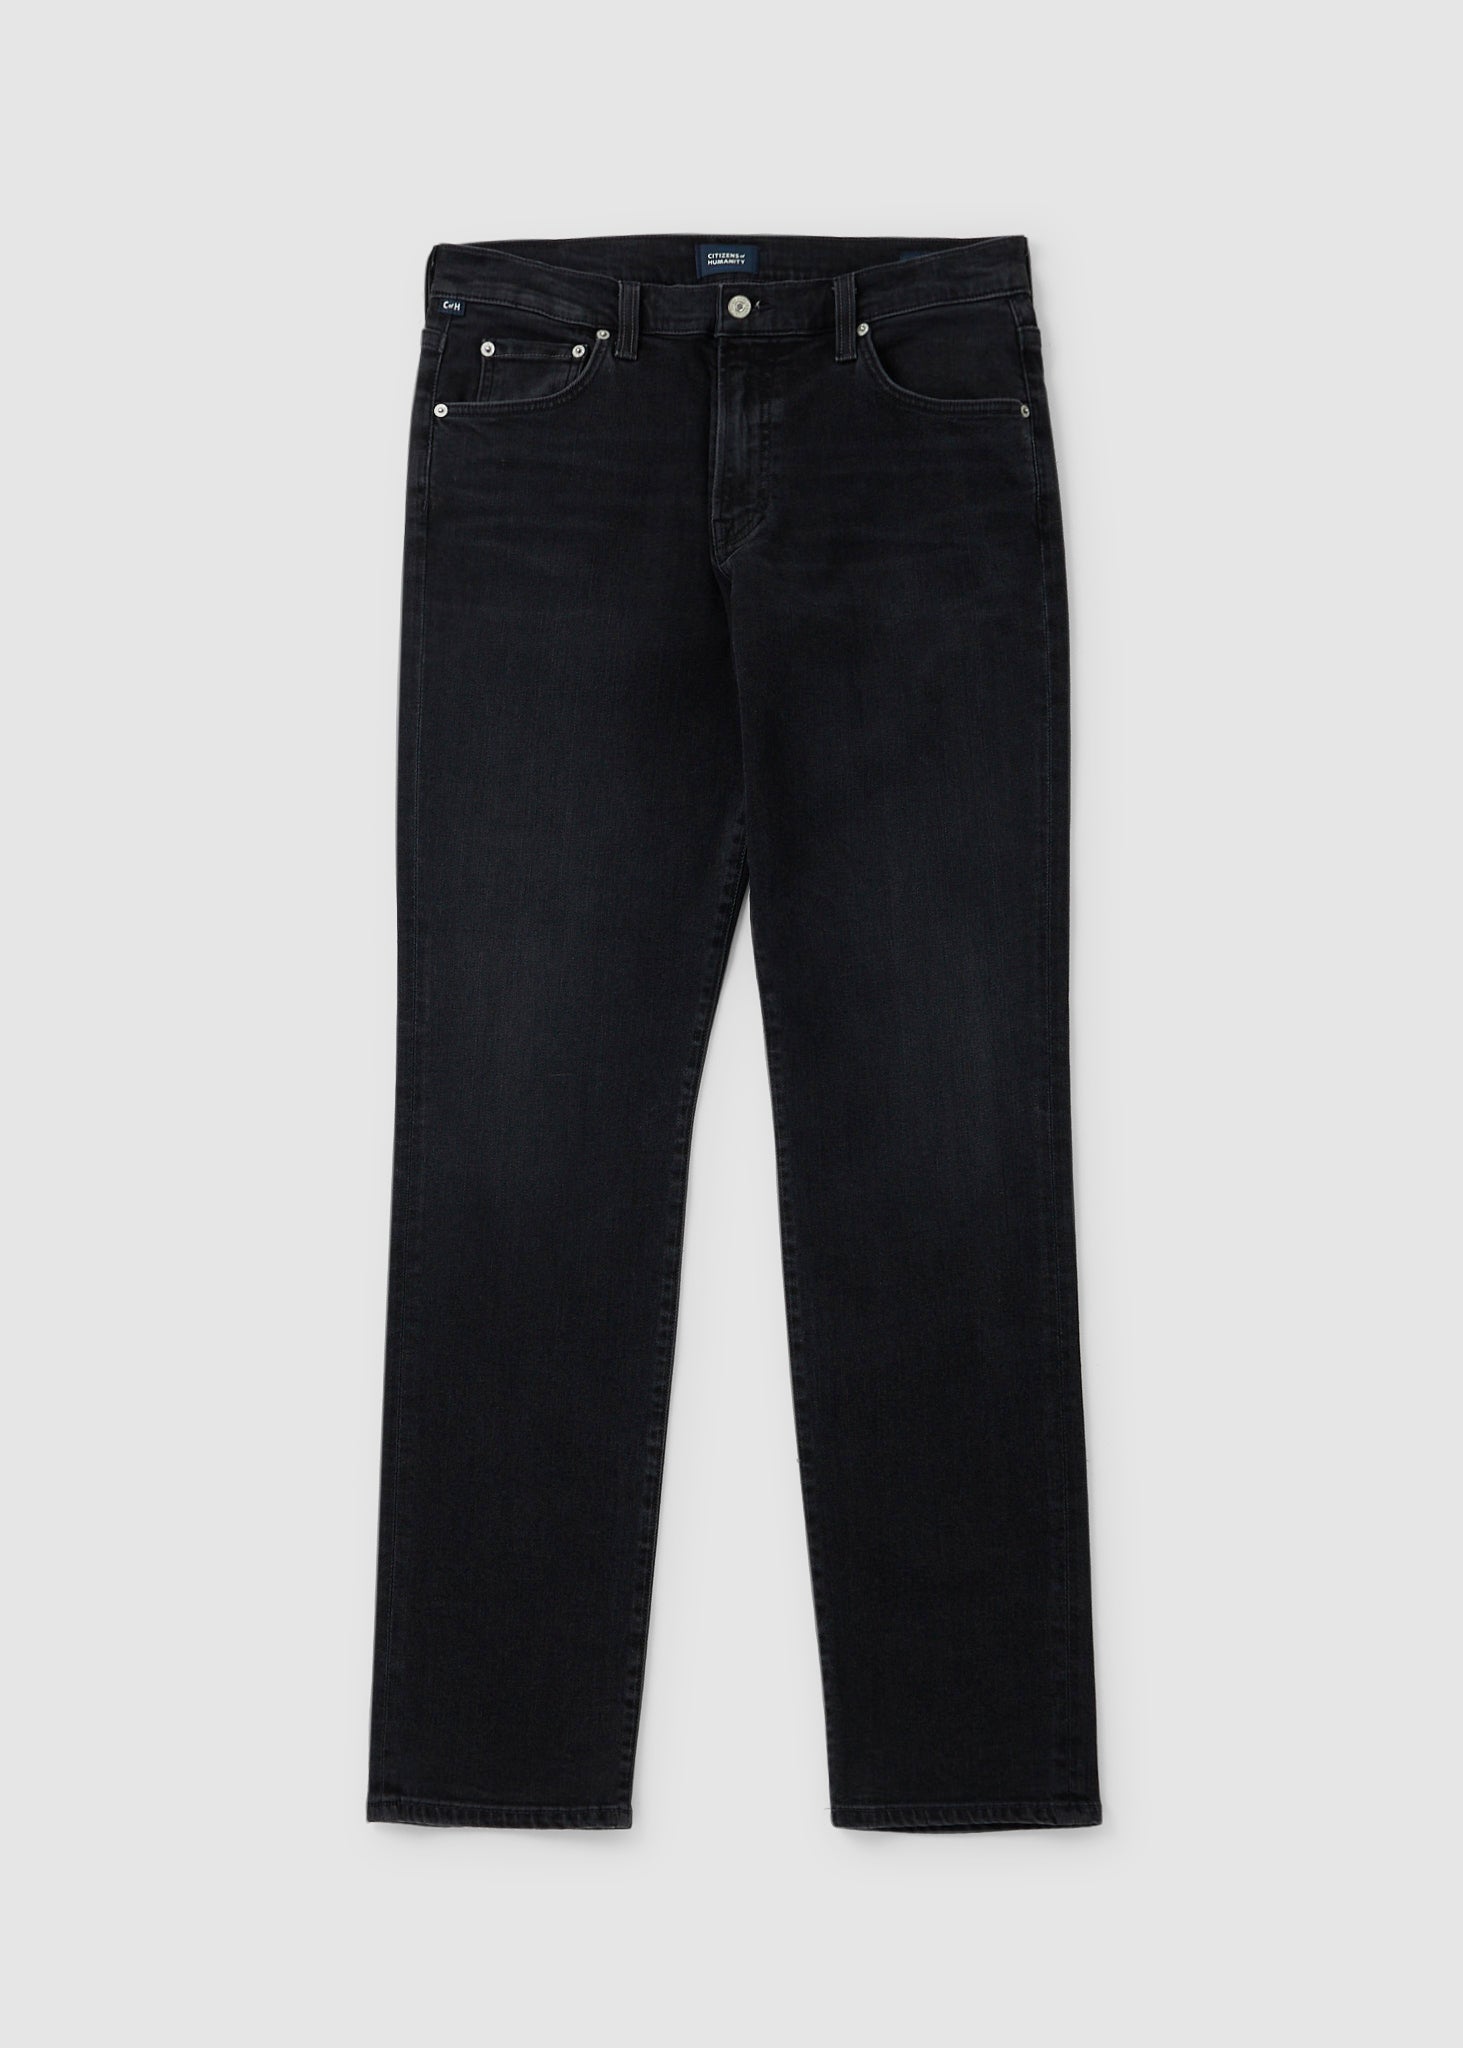 Citizens Of Humanity Mens Adler Jeans